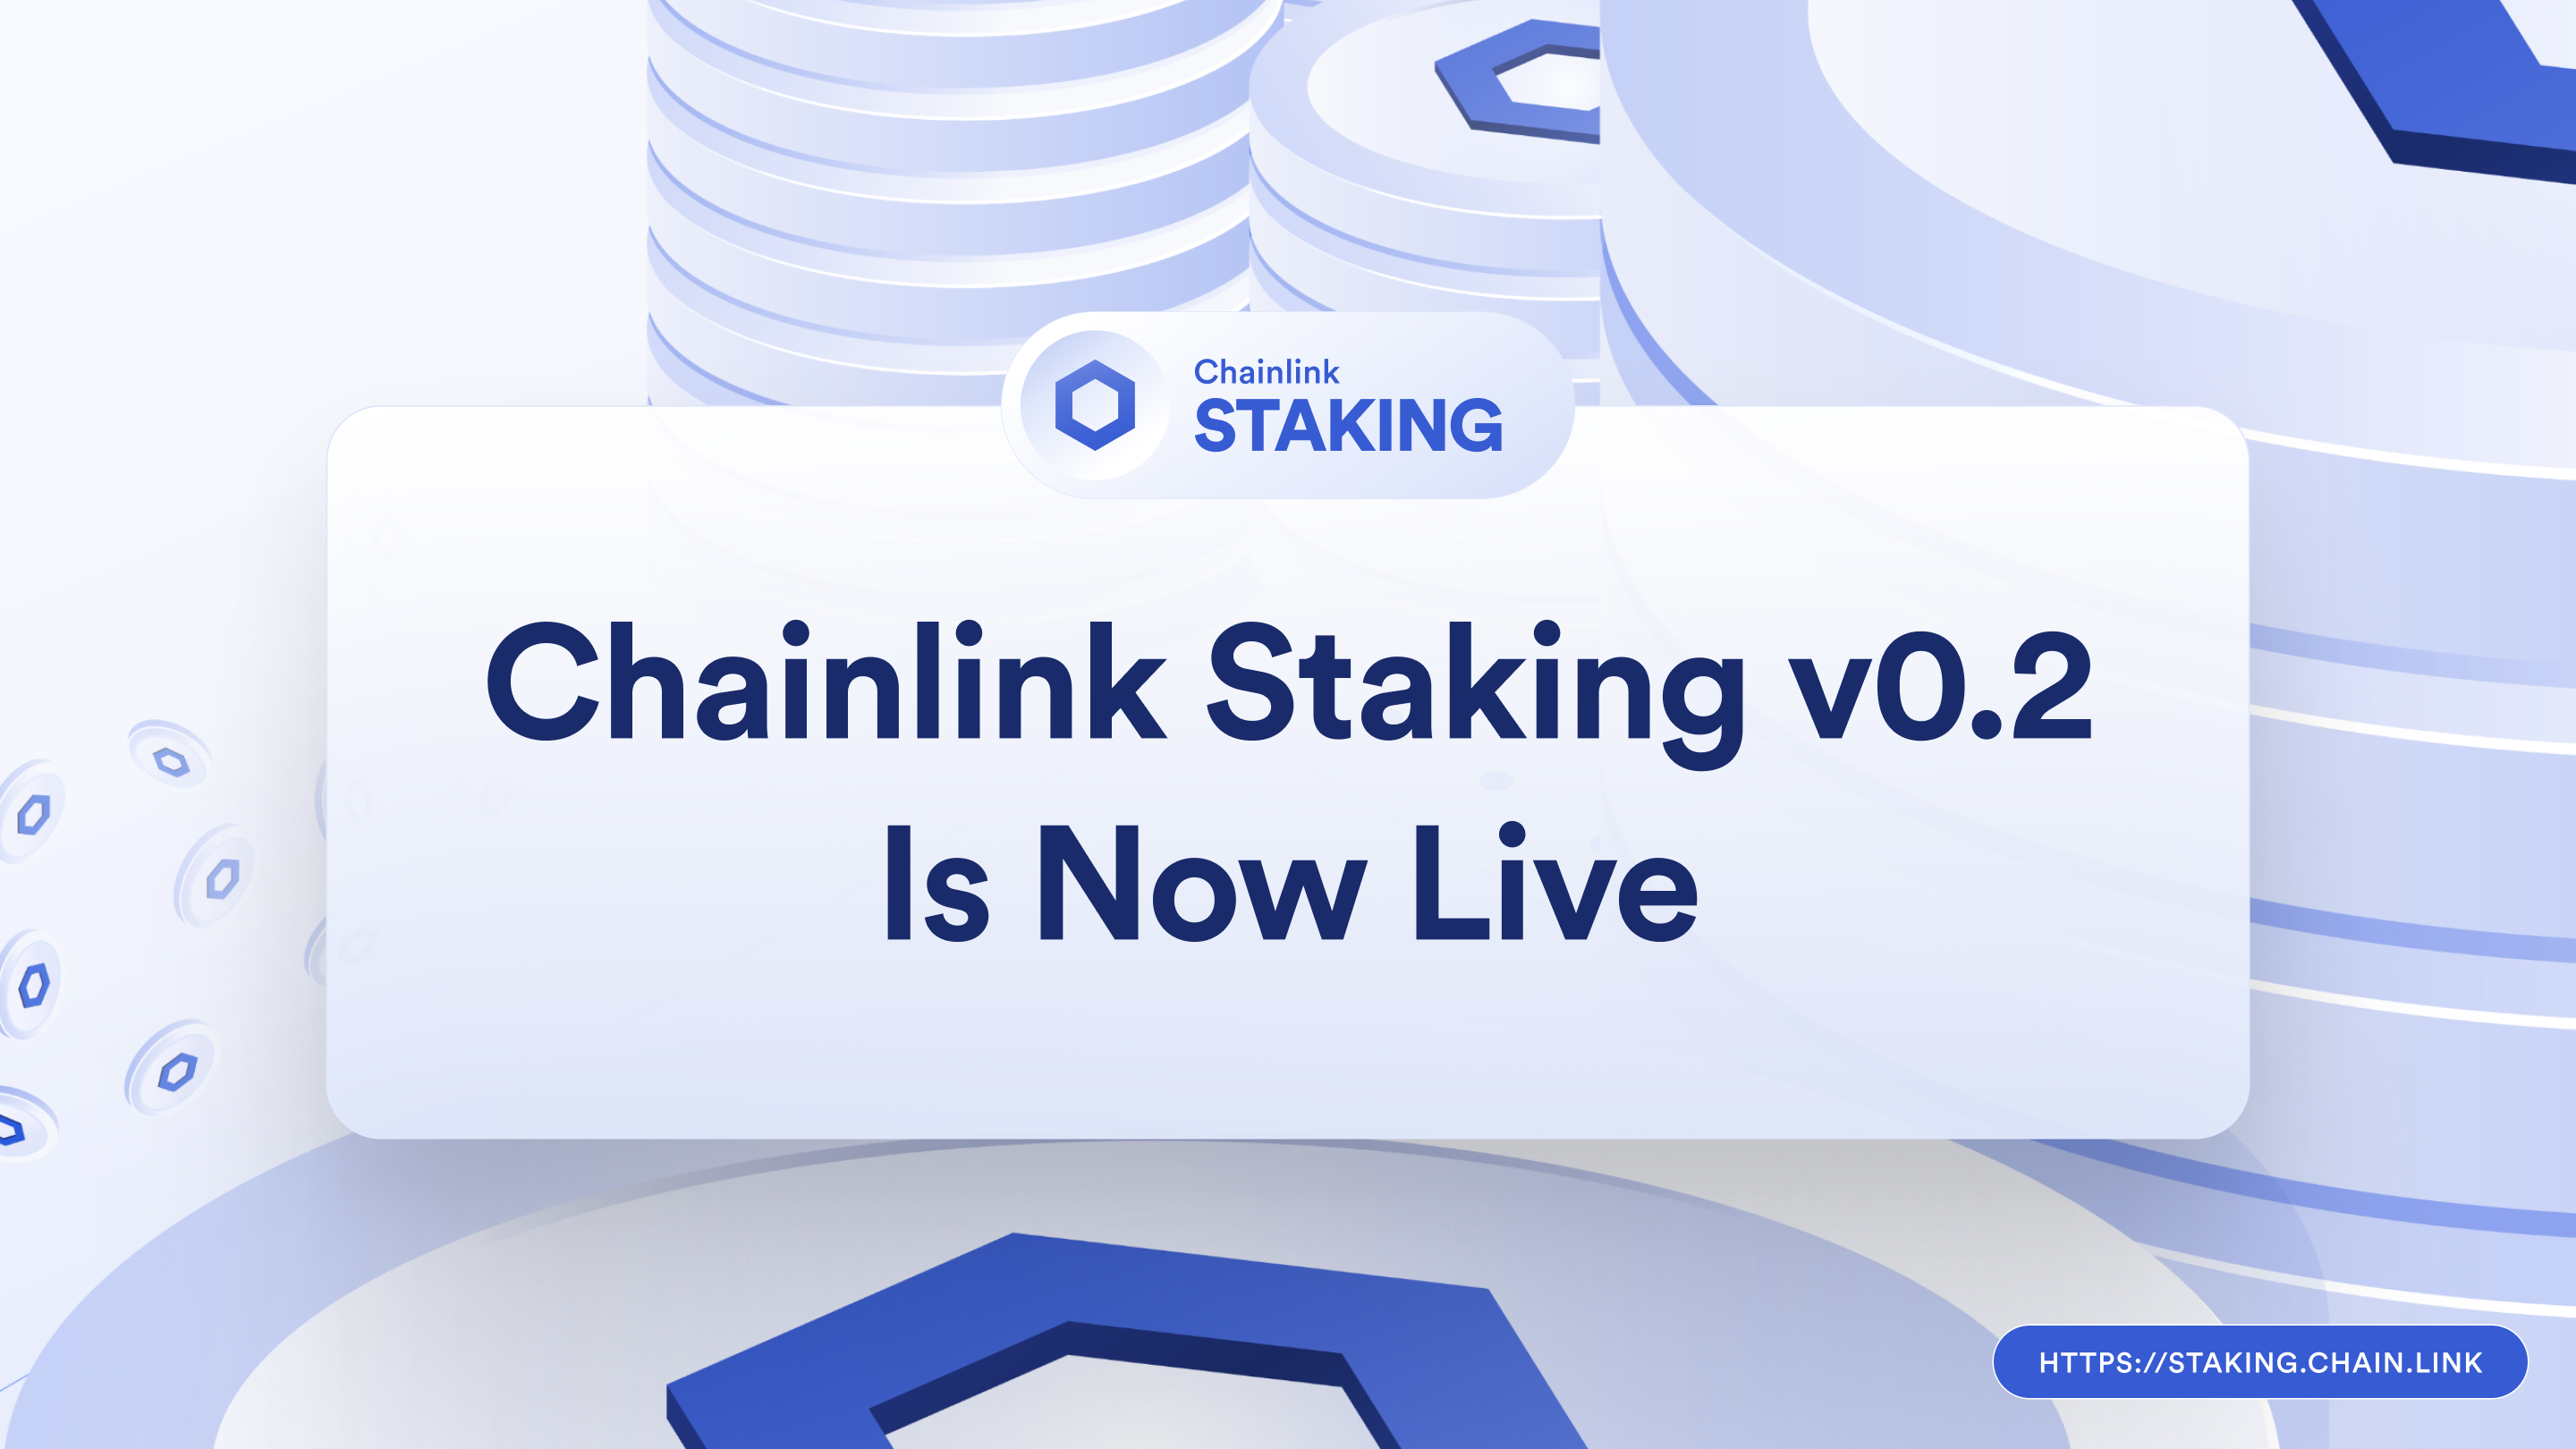 What Is Staking? | Chainlink